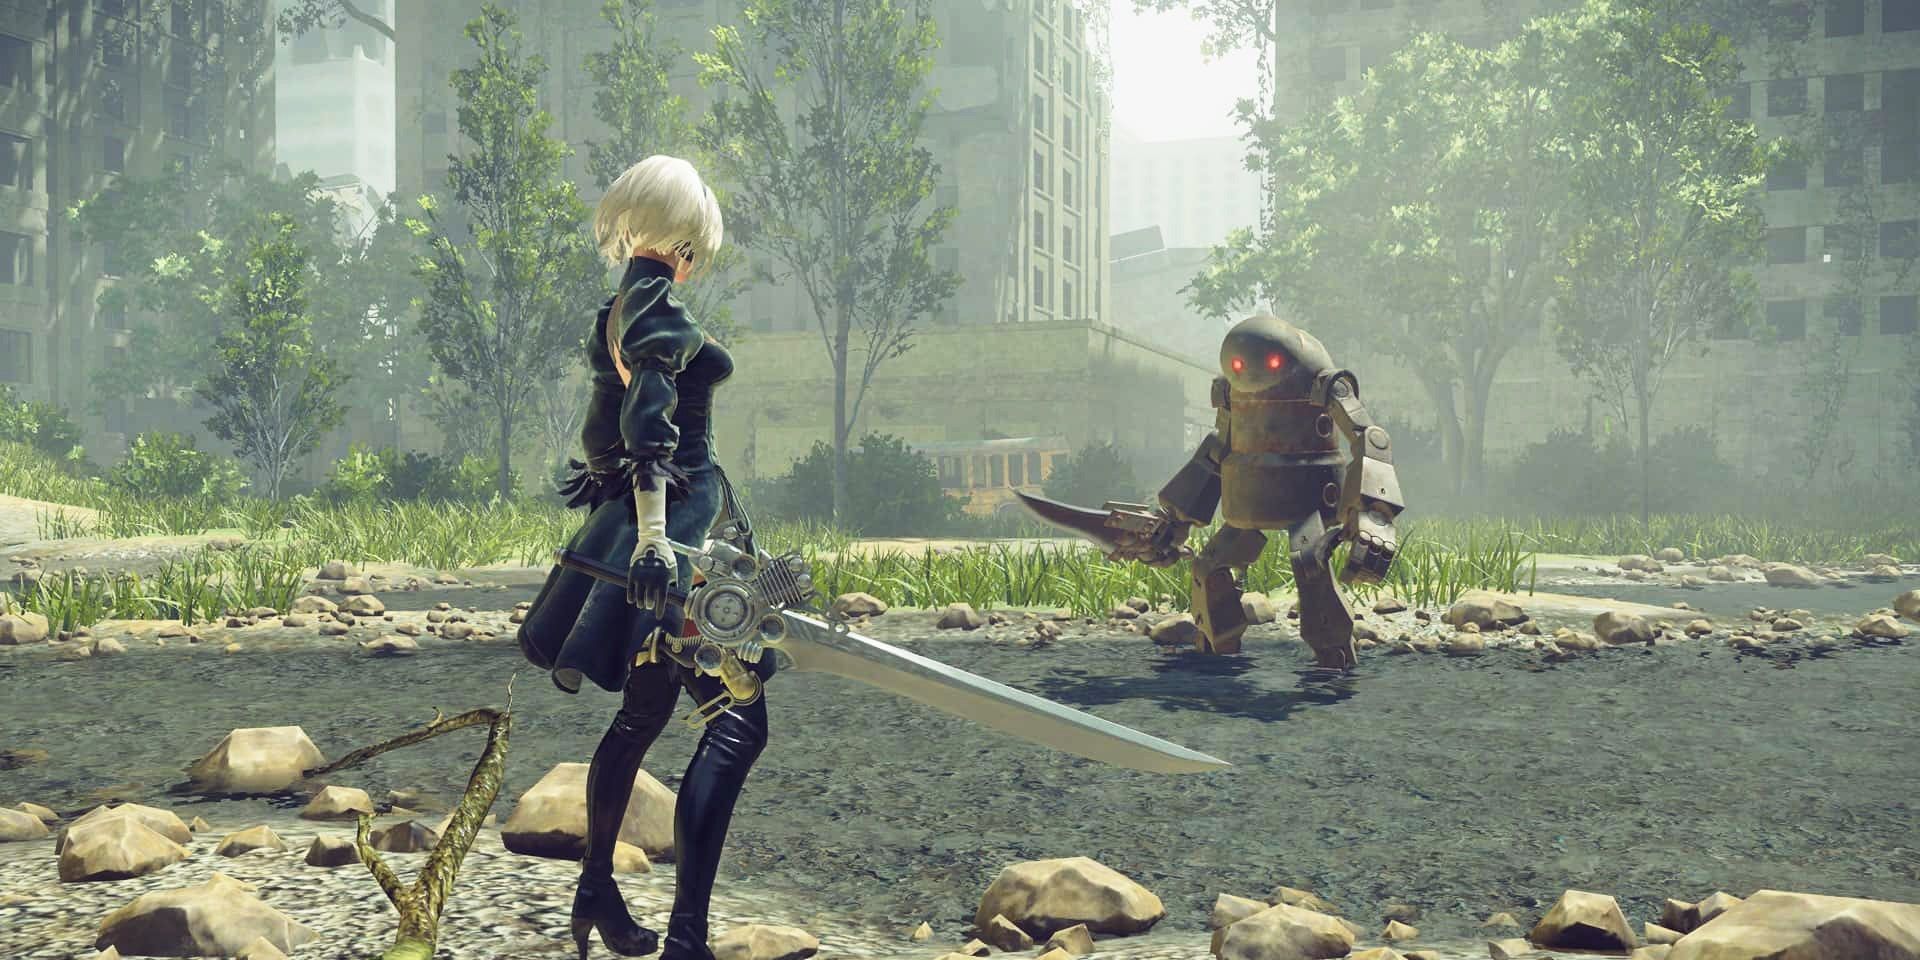 Nier Automata's UI and combat closely resembles that of Scarlet Nexus